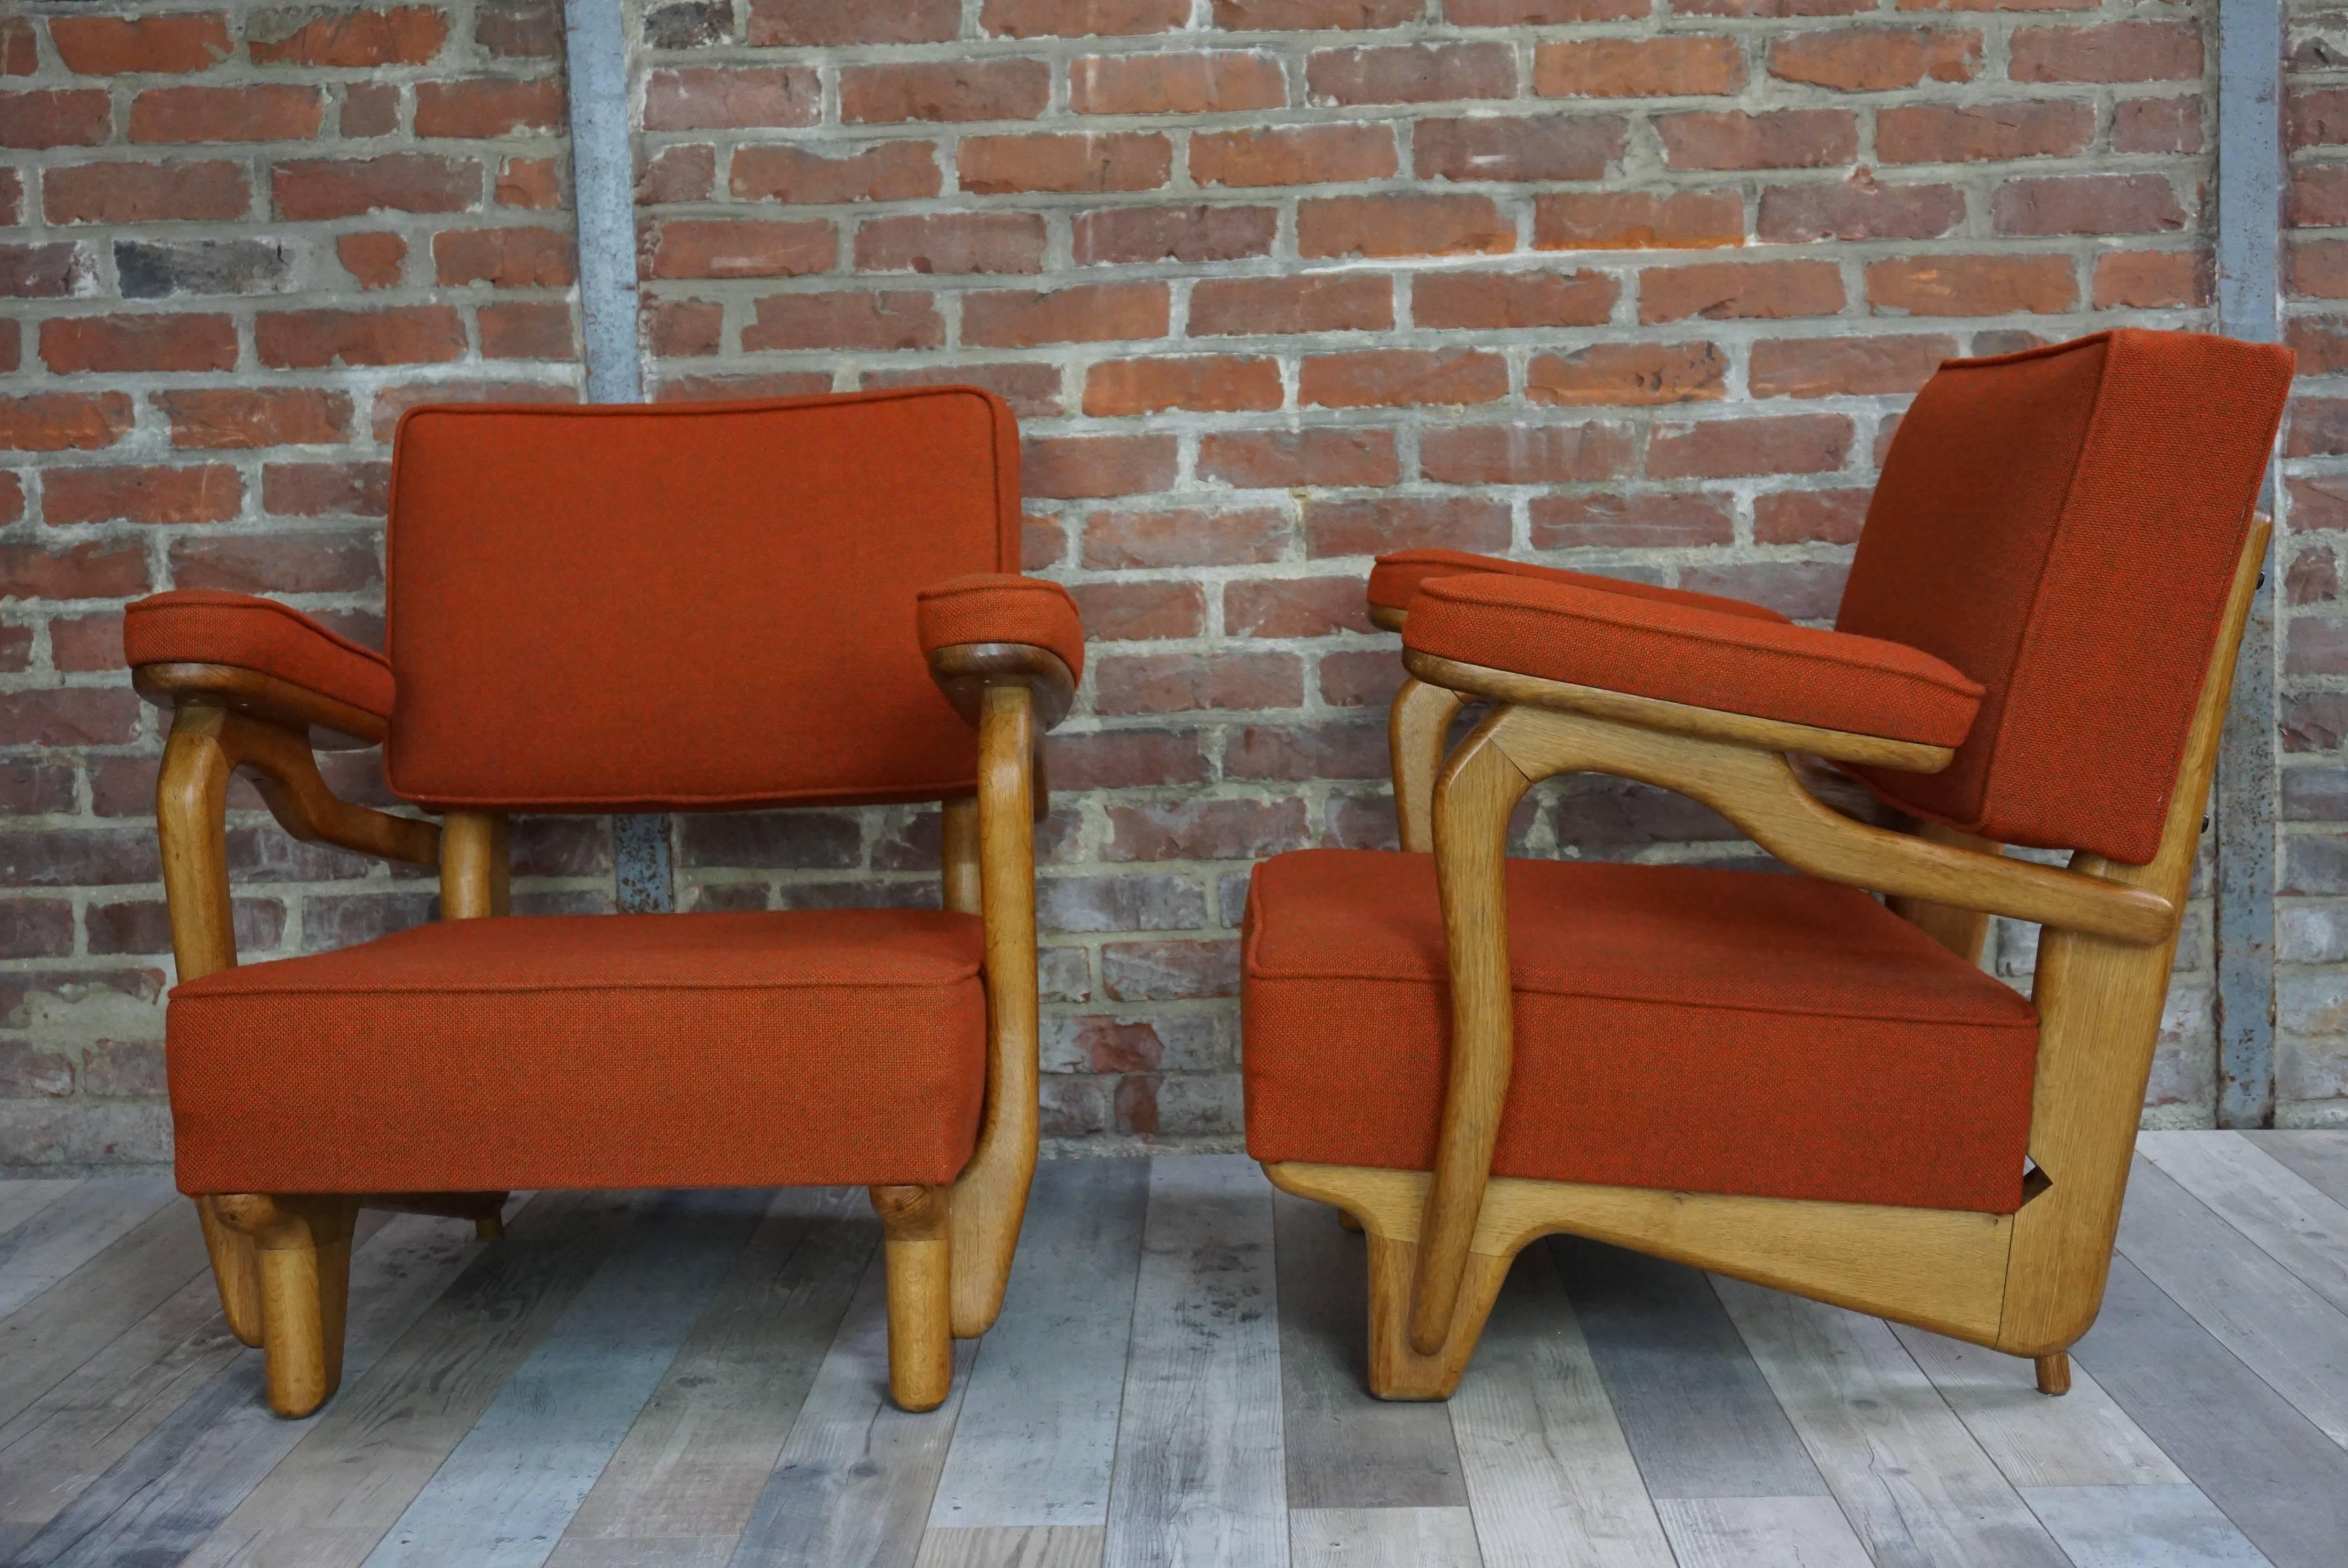 20th Century French Design of the 1950s Armchairs by Guillerme et Chambron